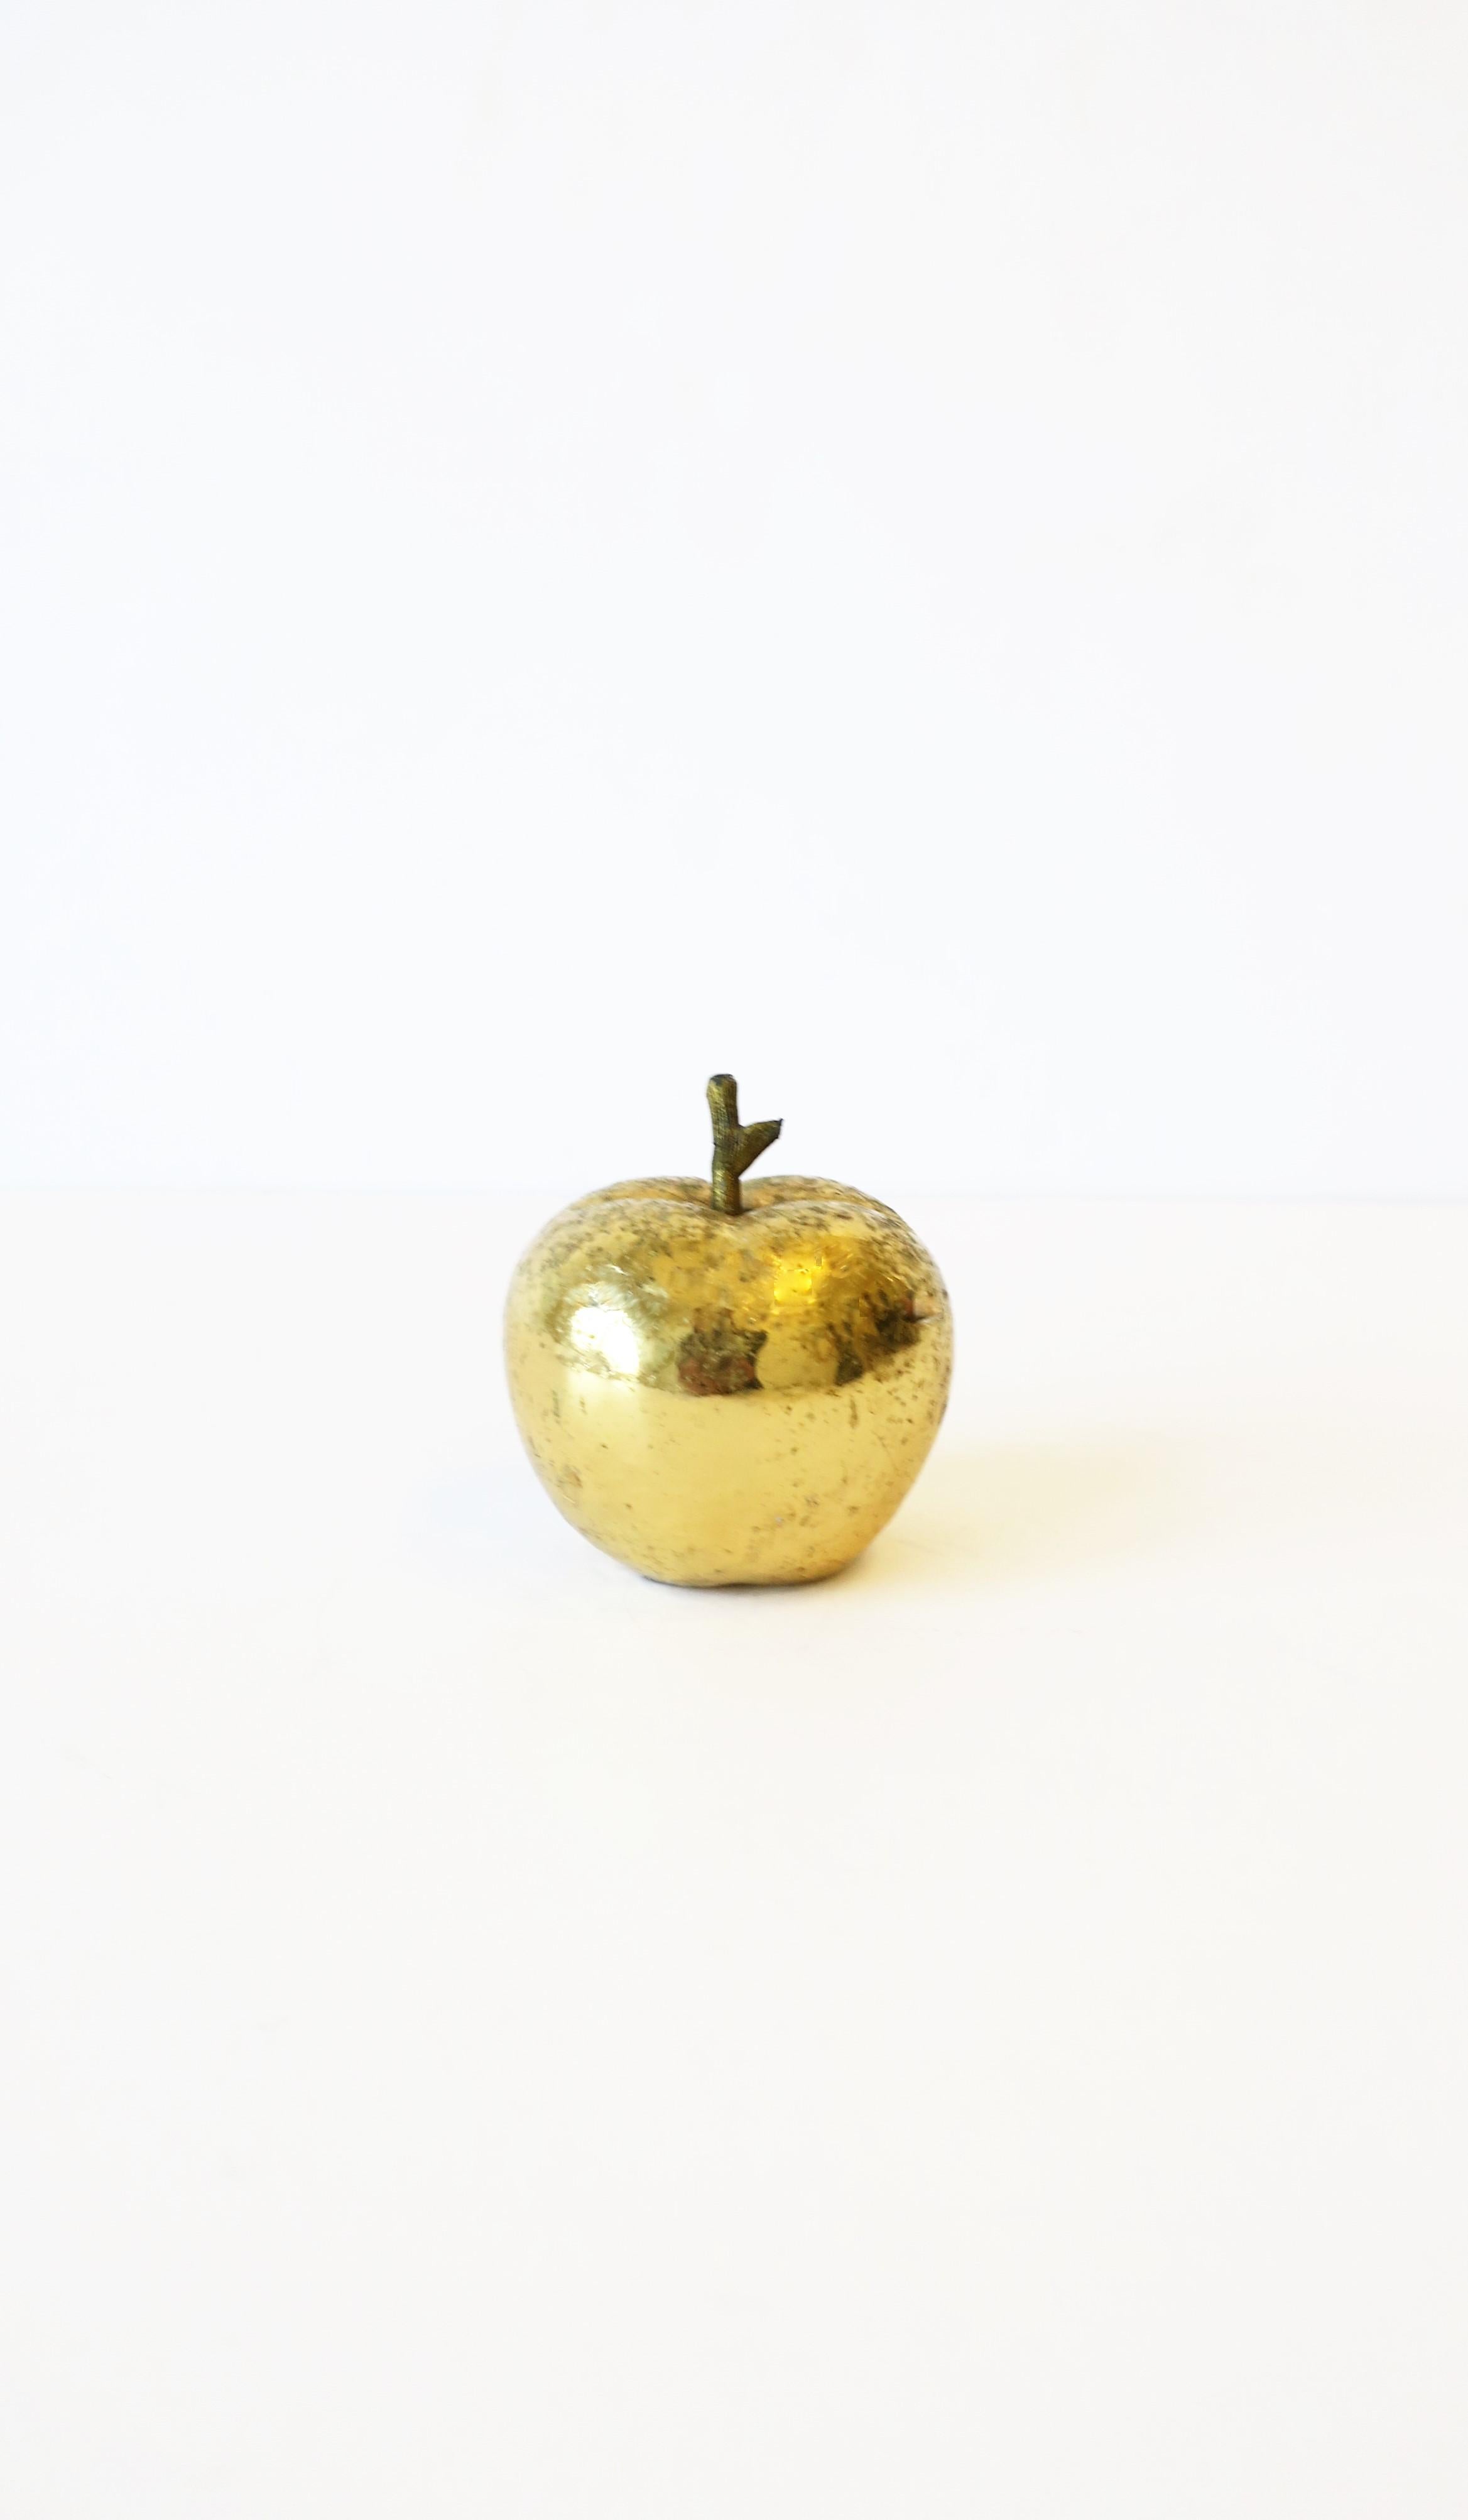 A substantial gold apple sculpture decorative object or paperweight. Apple has a bright and reflective gold exterior over bronze or brass with detailed stem. A cool piece for a desk or other area. Piece measures: 2